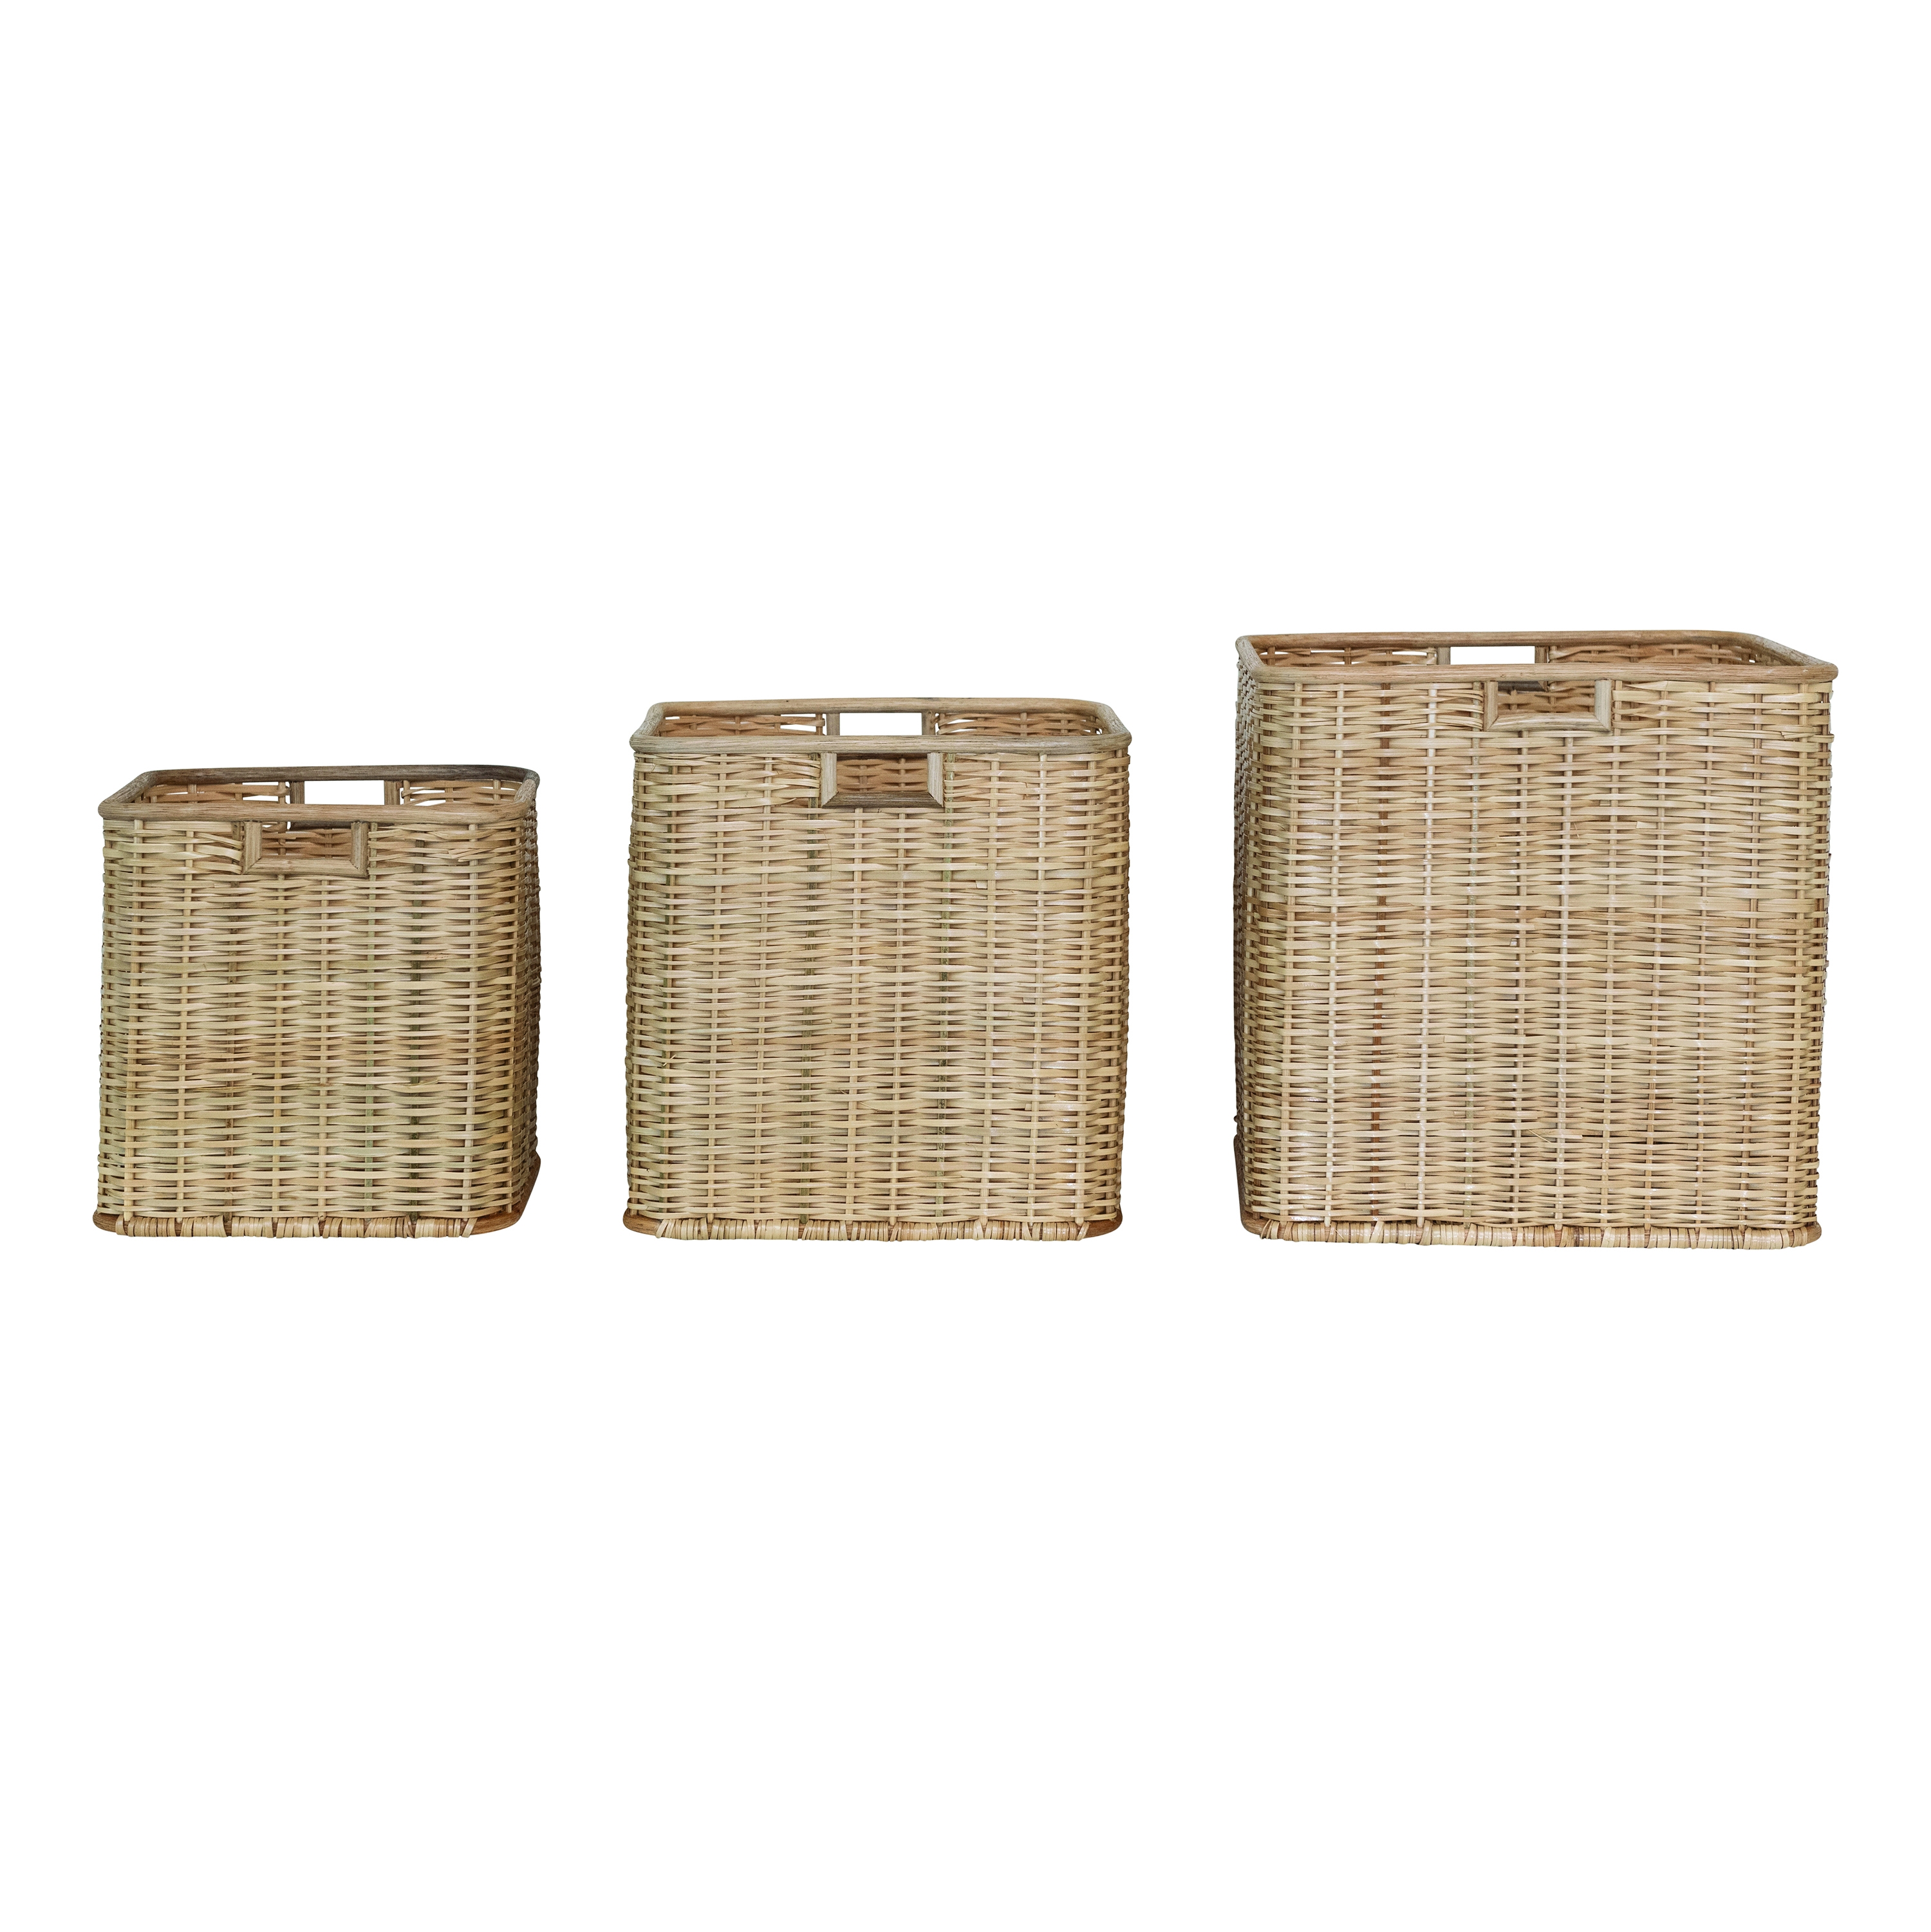 Square Handmade Palm and Rattan Basket Organizer for Decor and Storage with Handles, Natural Brown, Set of 3 - Image 0